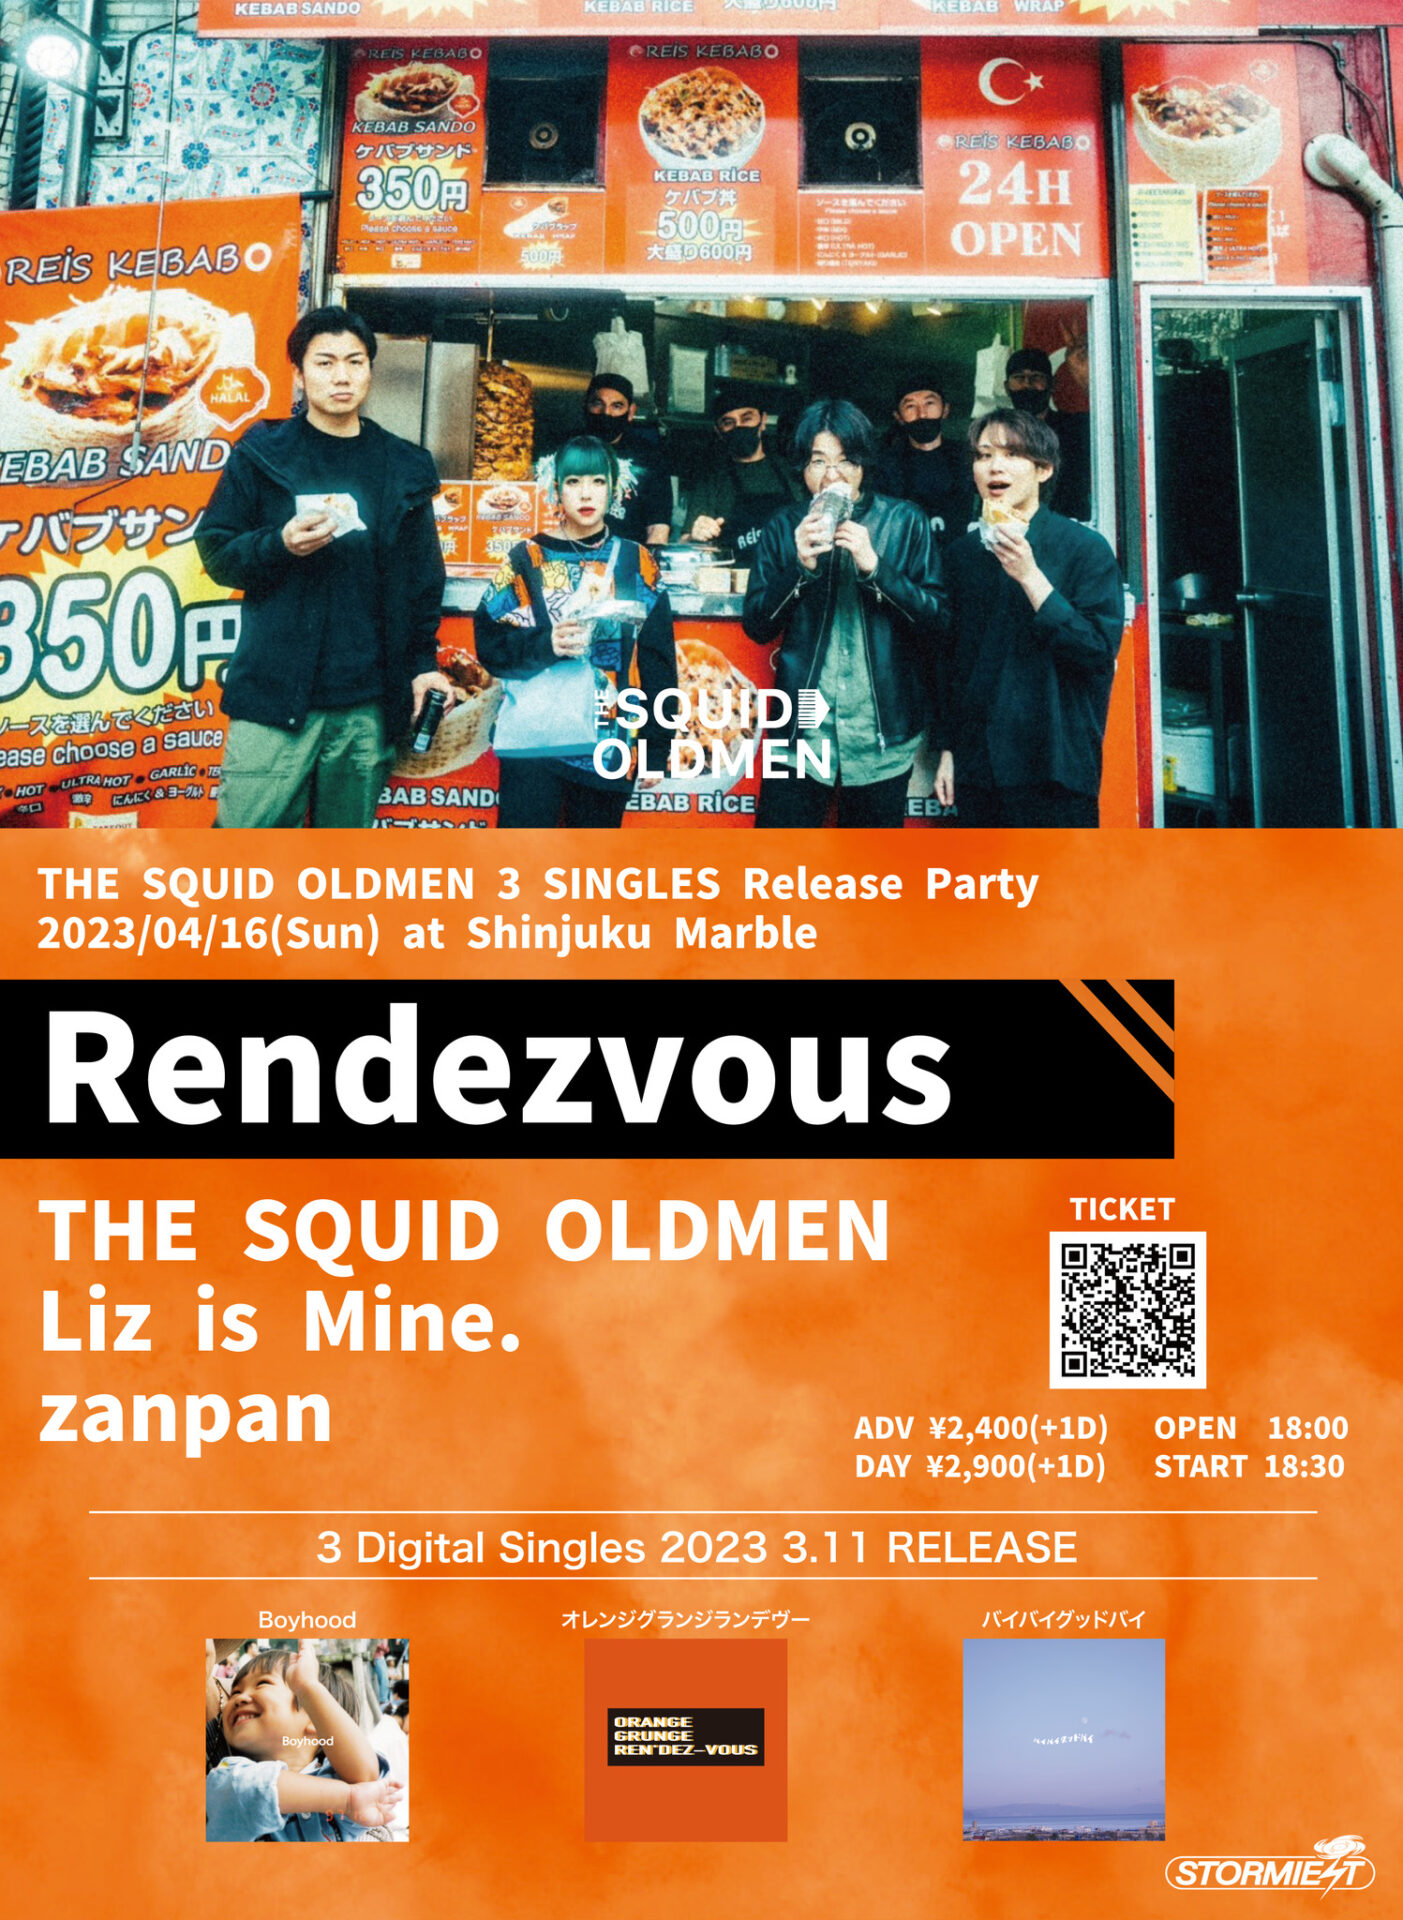 THE SQUID OLDMEN 3 SINGLES Release Party「Rendezvous」